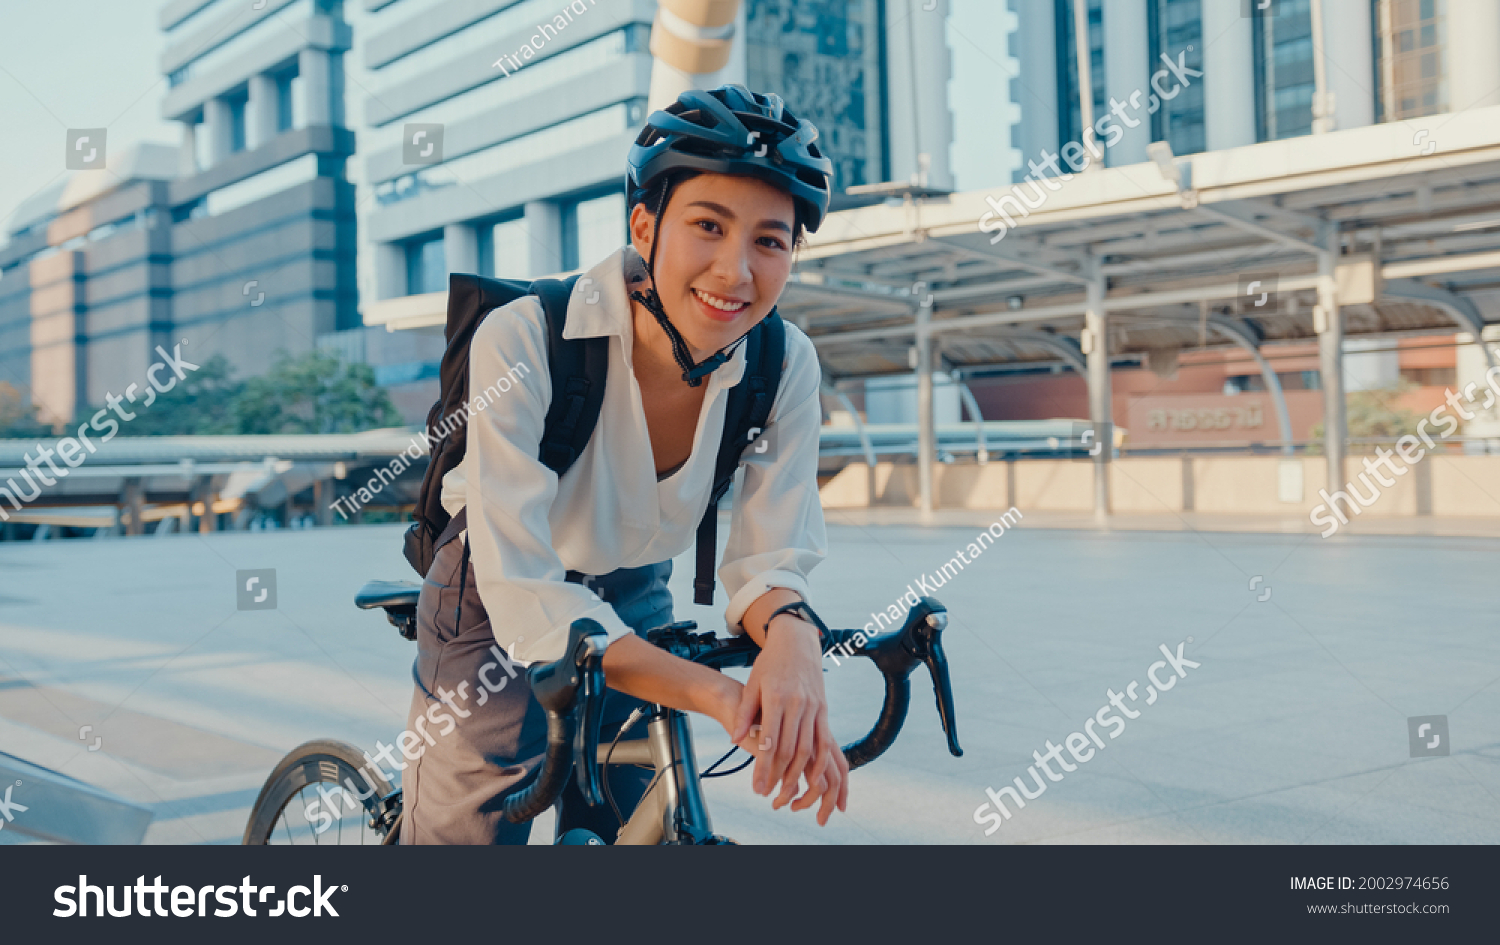 Asian businesswoman go to work at office stand and smiling wear backpack look at camera with bicycle on street around building on a city. Bike commuting, Commute on bike, Business commuter concept. #2002974656